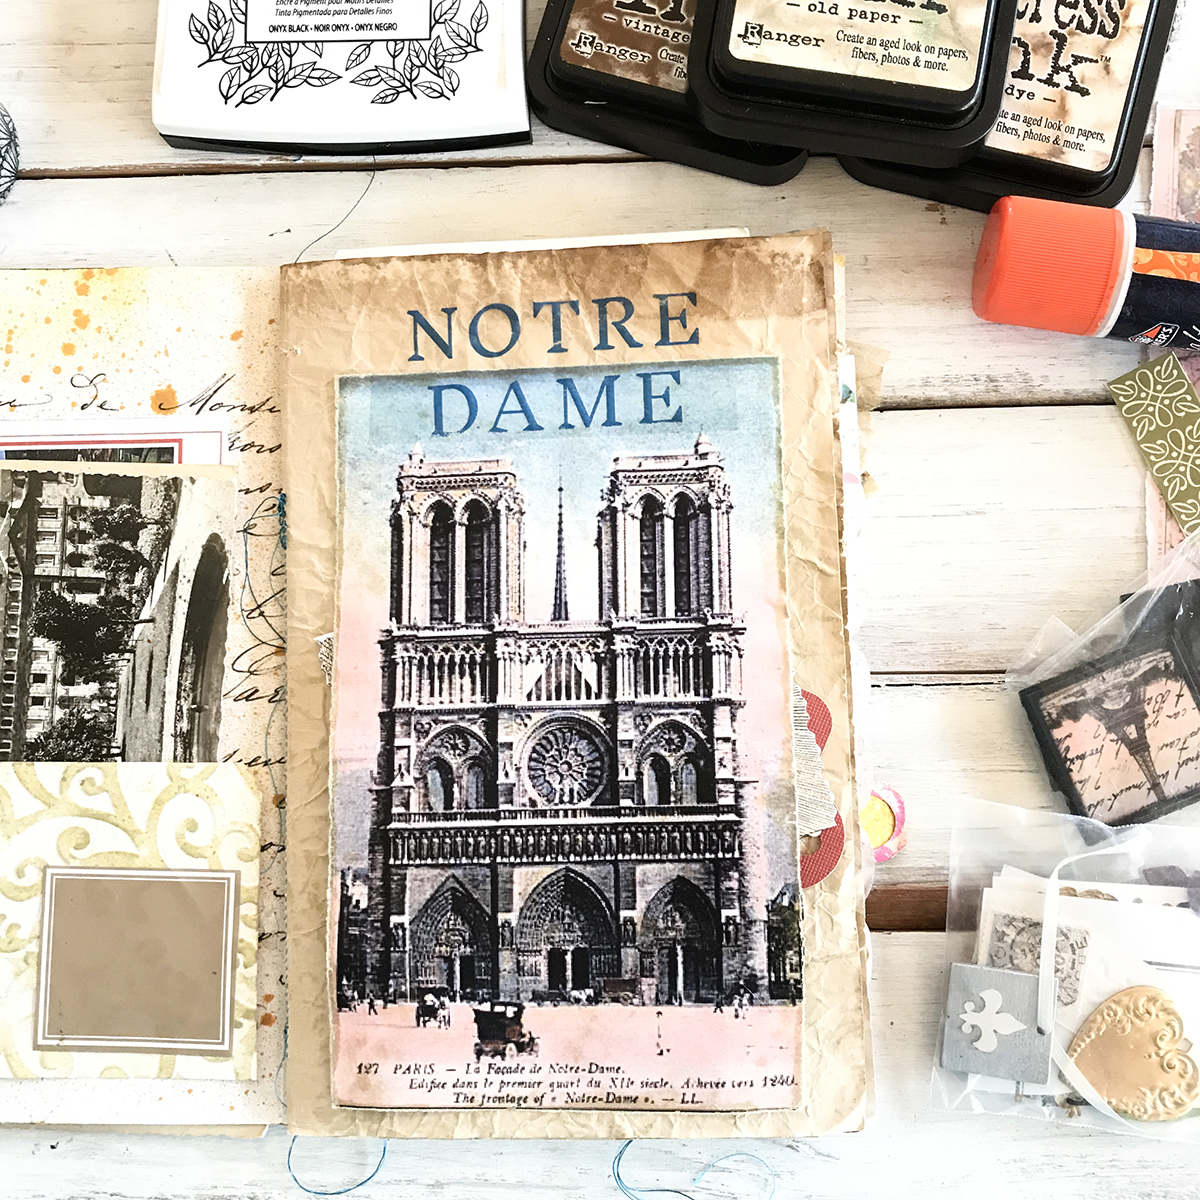 Notre dame page